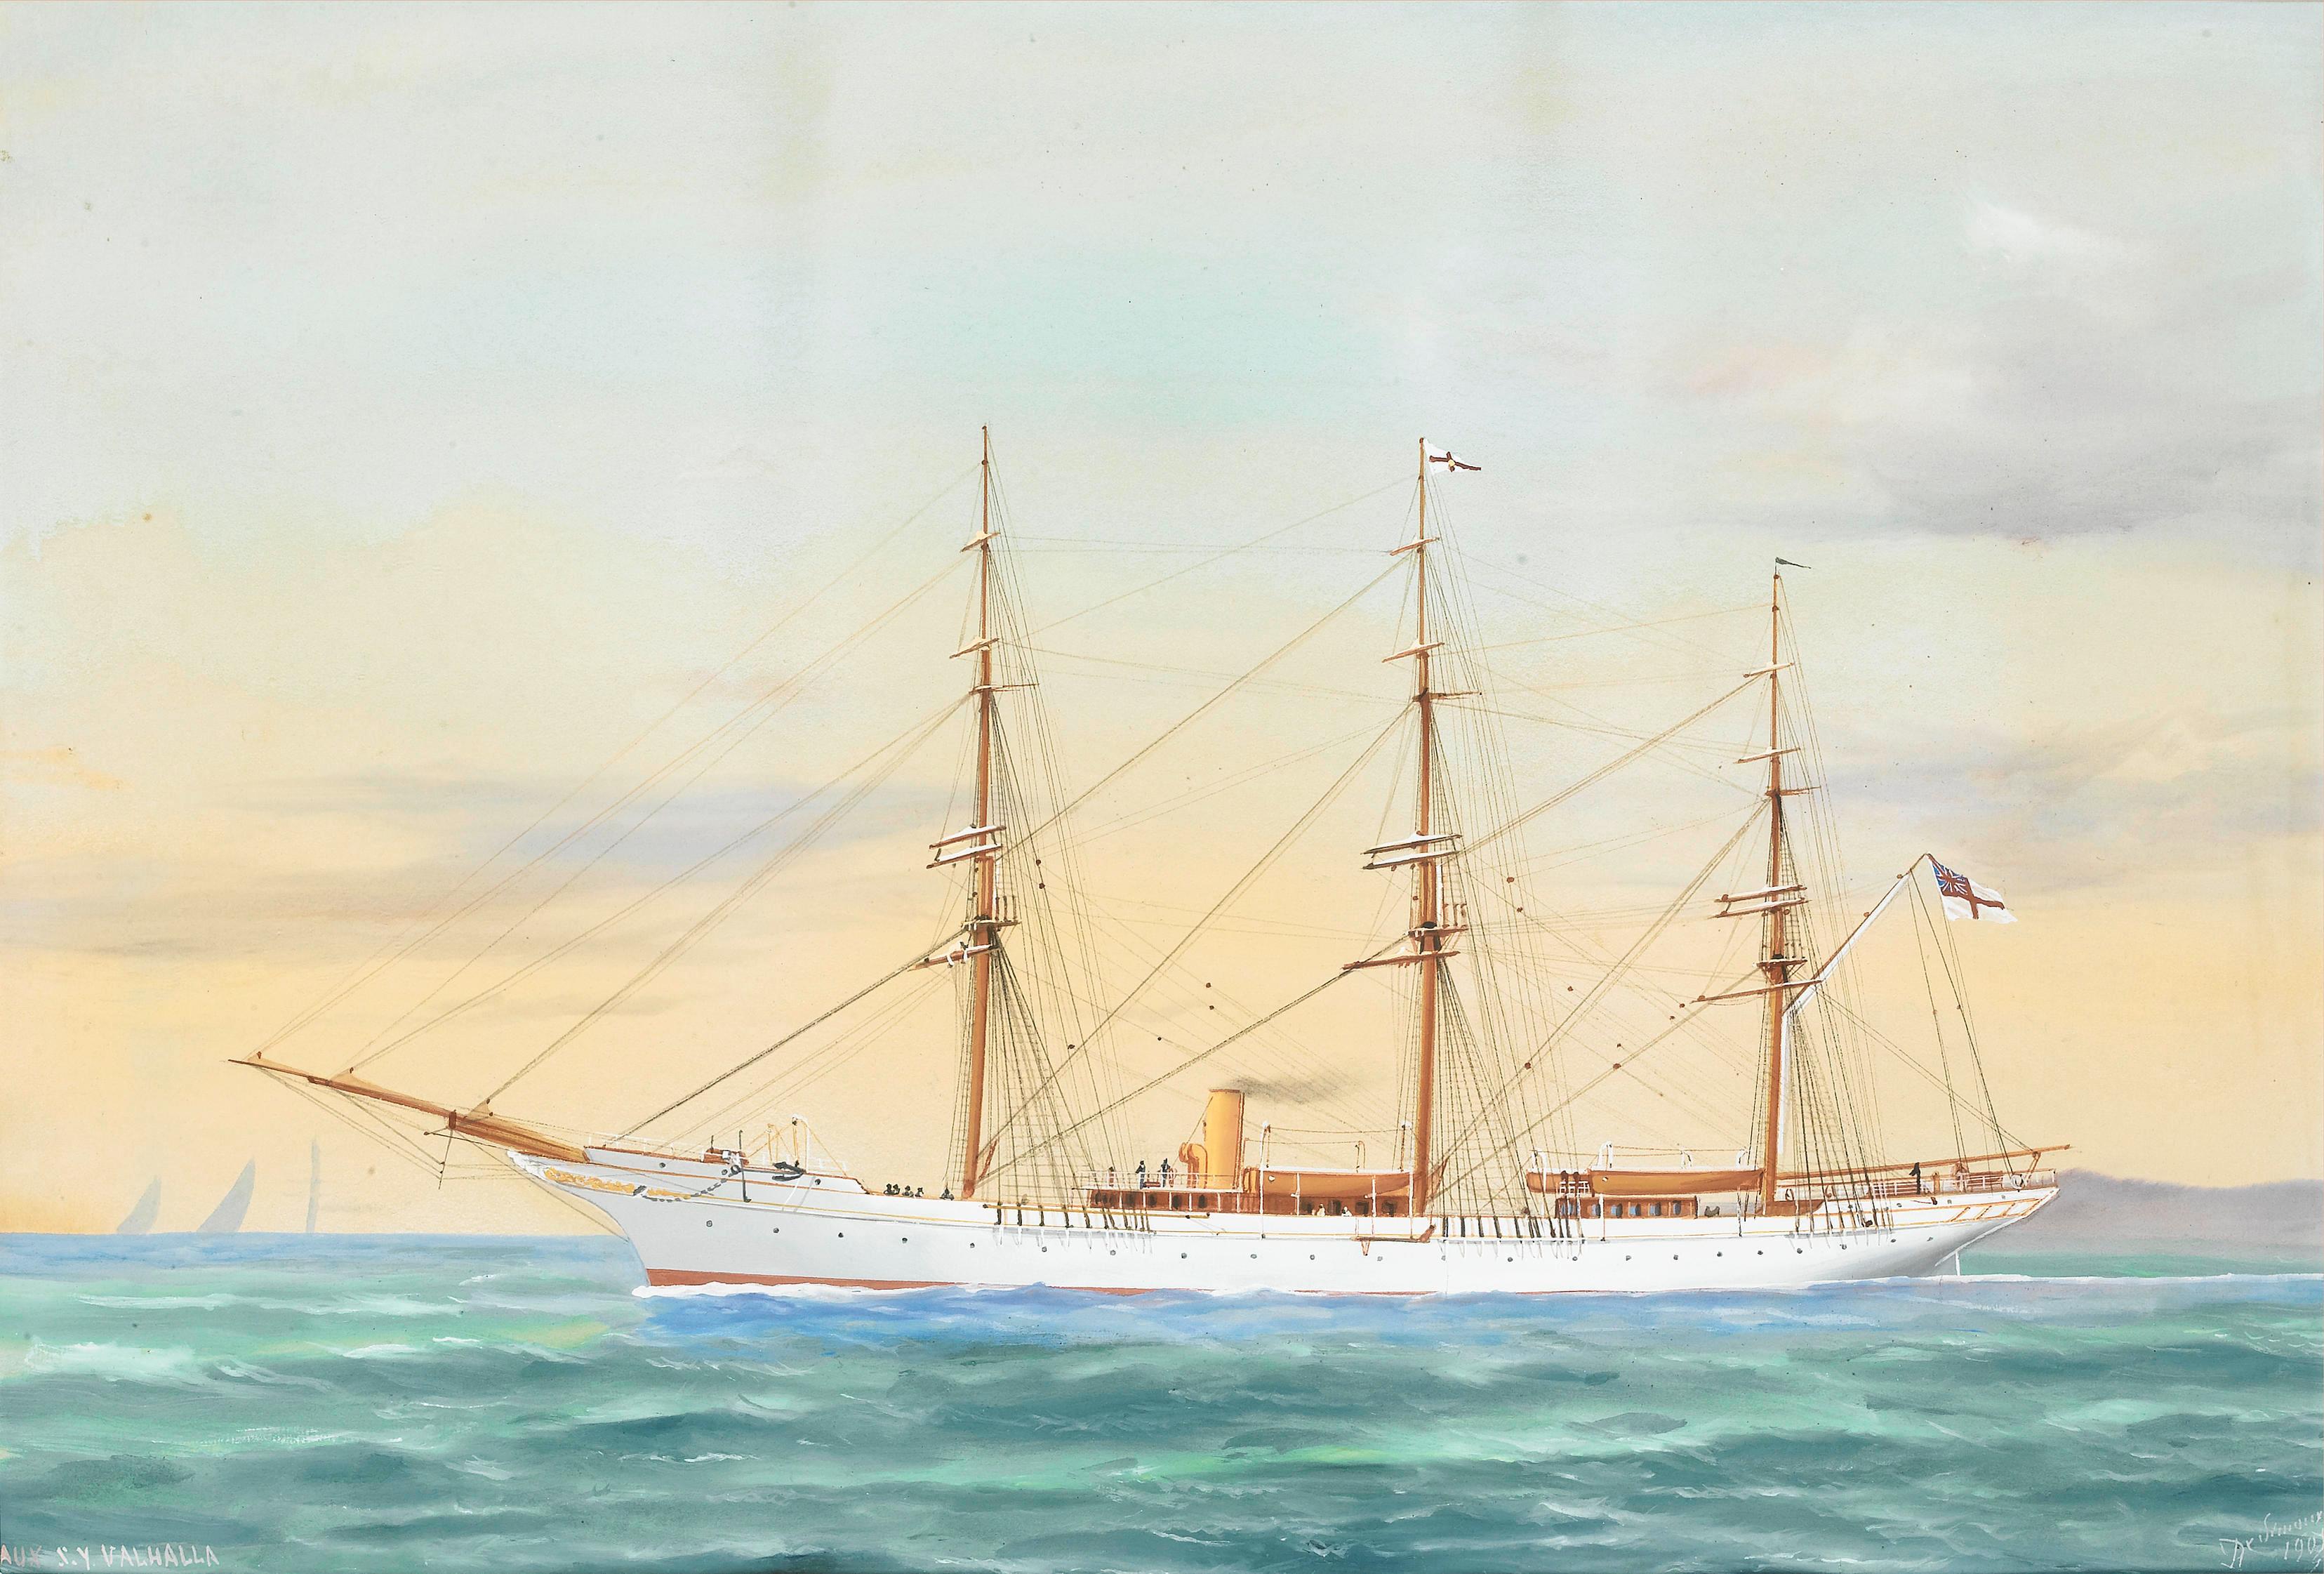 The auxiliary steam yacht Valhalla in 1901 by de Simone